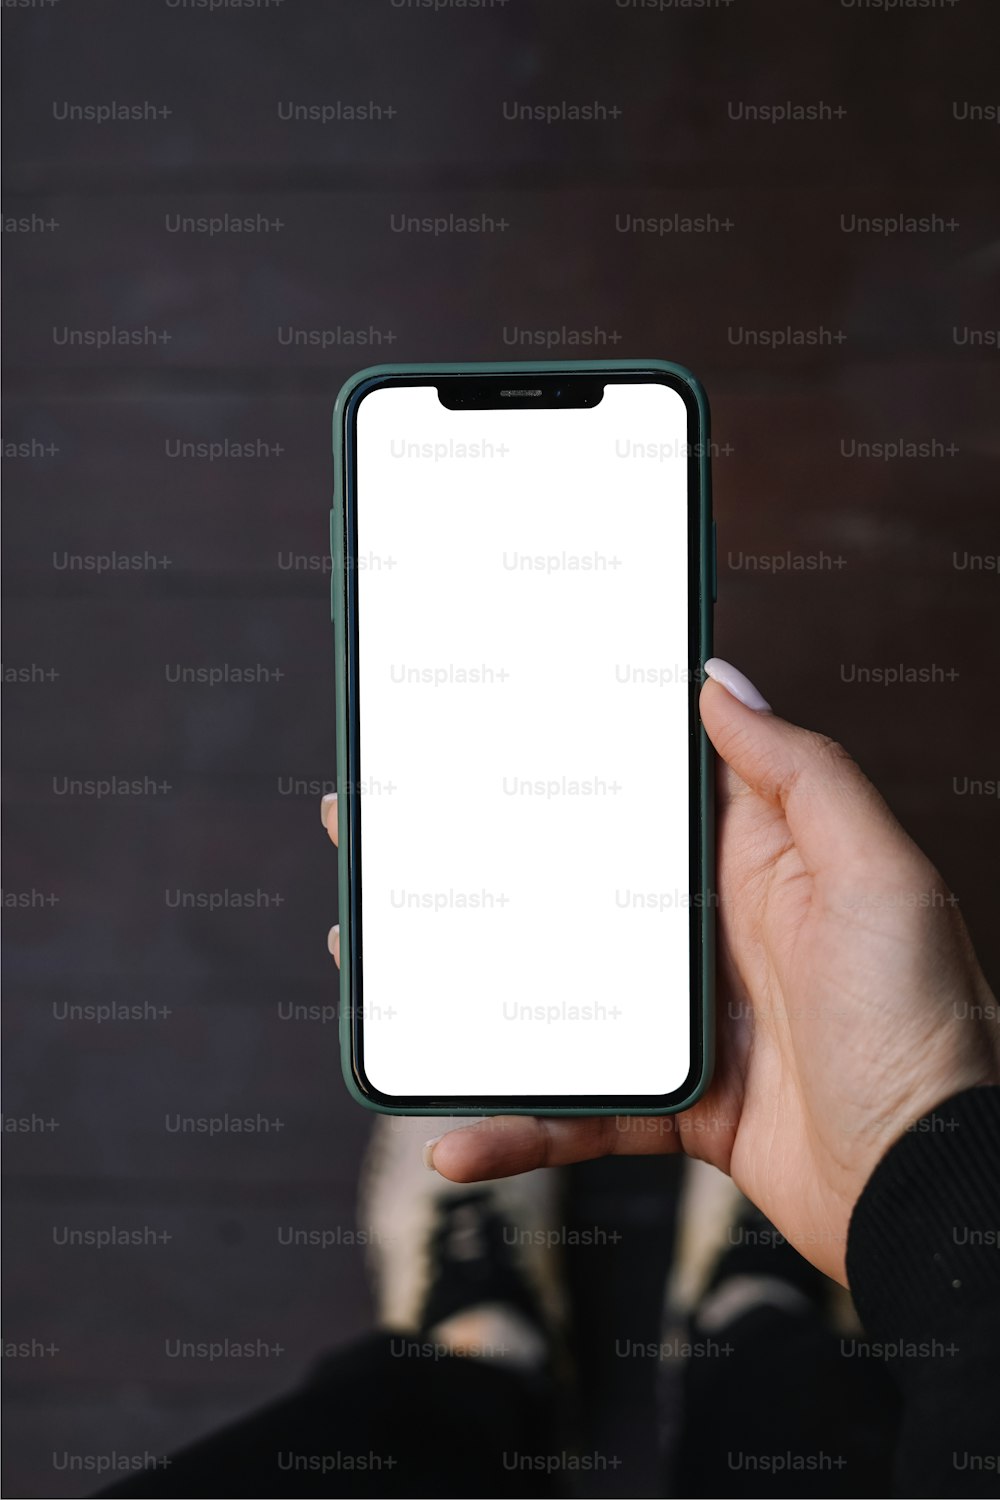 a person holding a cell phone with a white screen